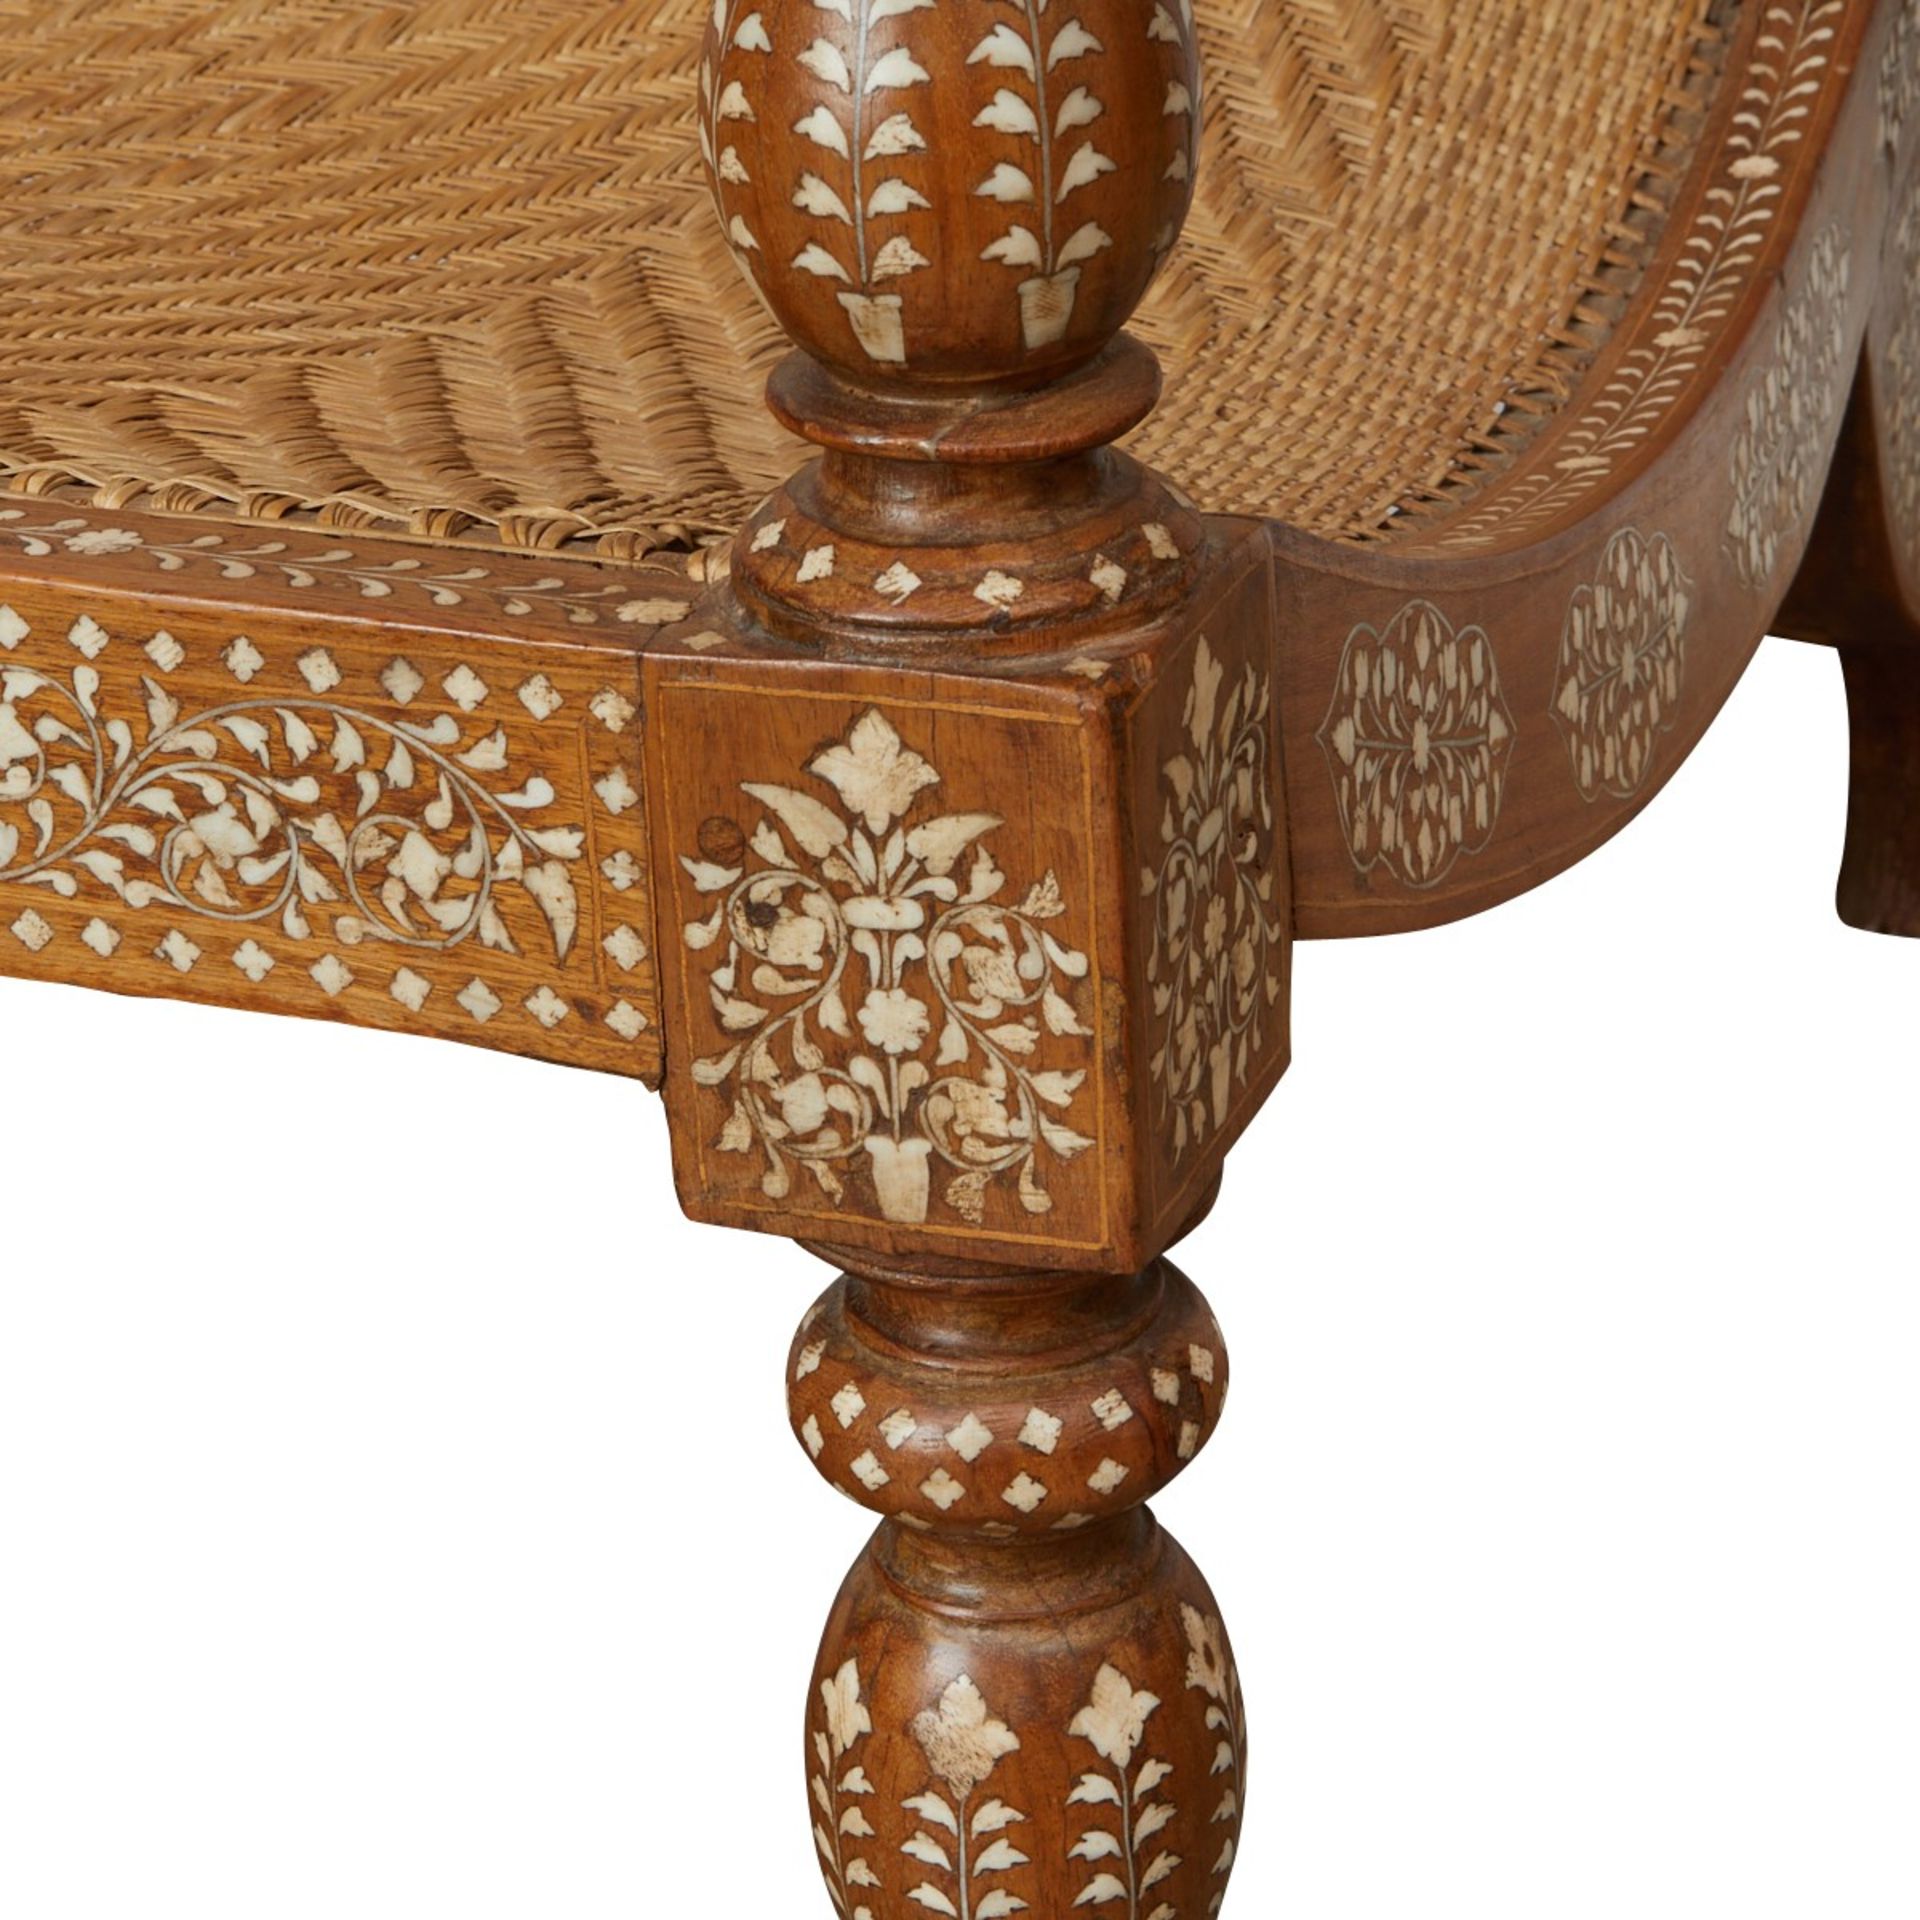 Syrian Inlaid Mother of Pearl Plantation Chair - Image 16 of 16